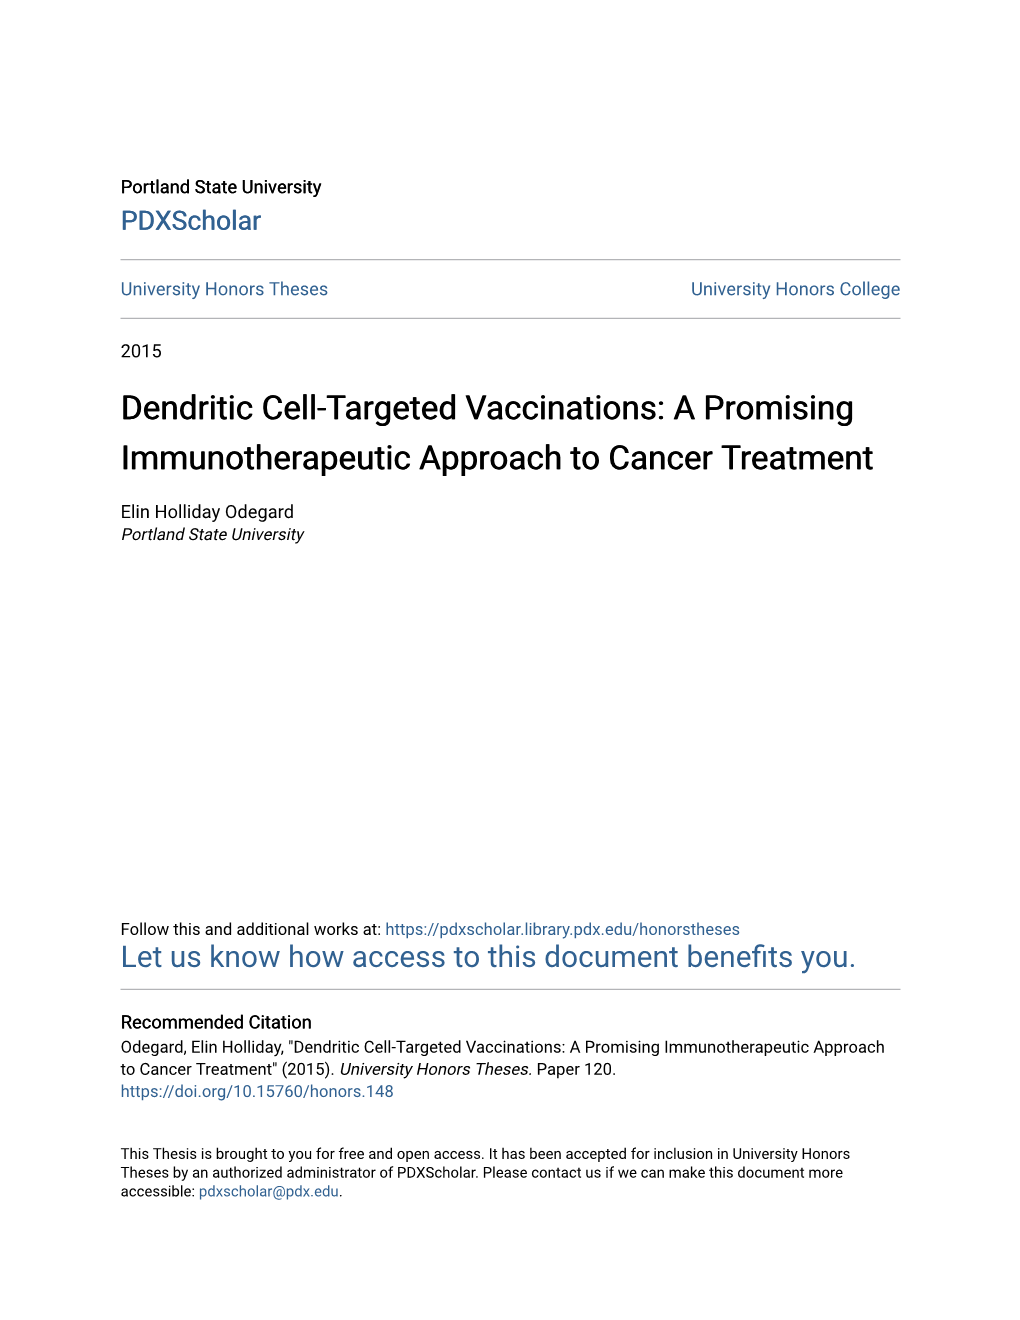 Dendritic Cell-Targeted Vaccinations: a Promising Immunotherapeutic Approach to Cancer Treatment